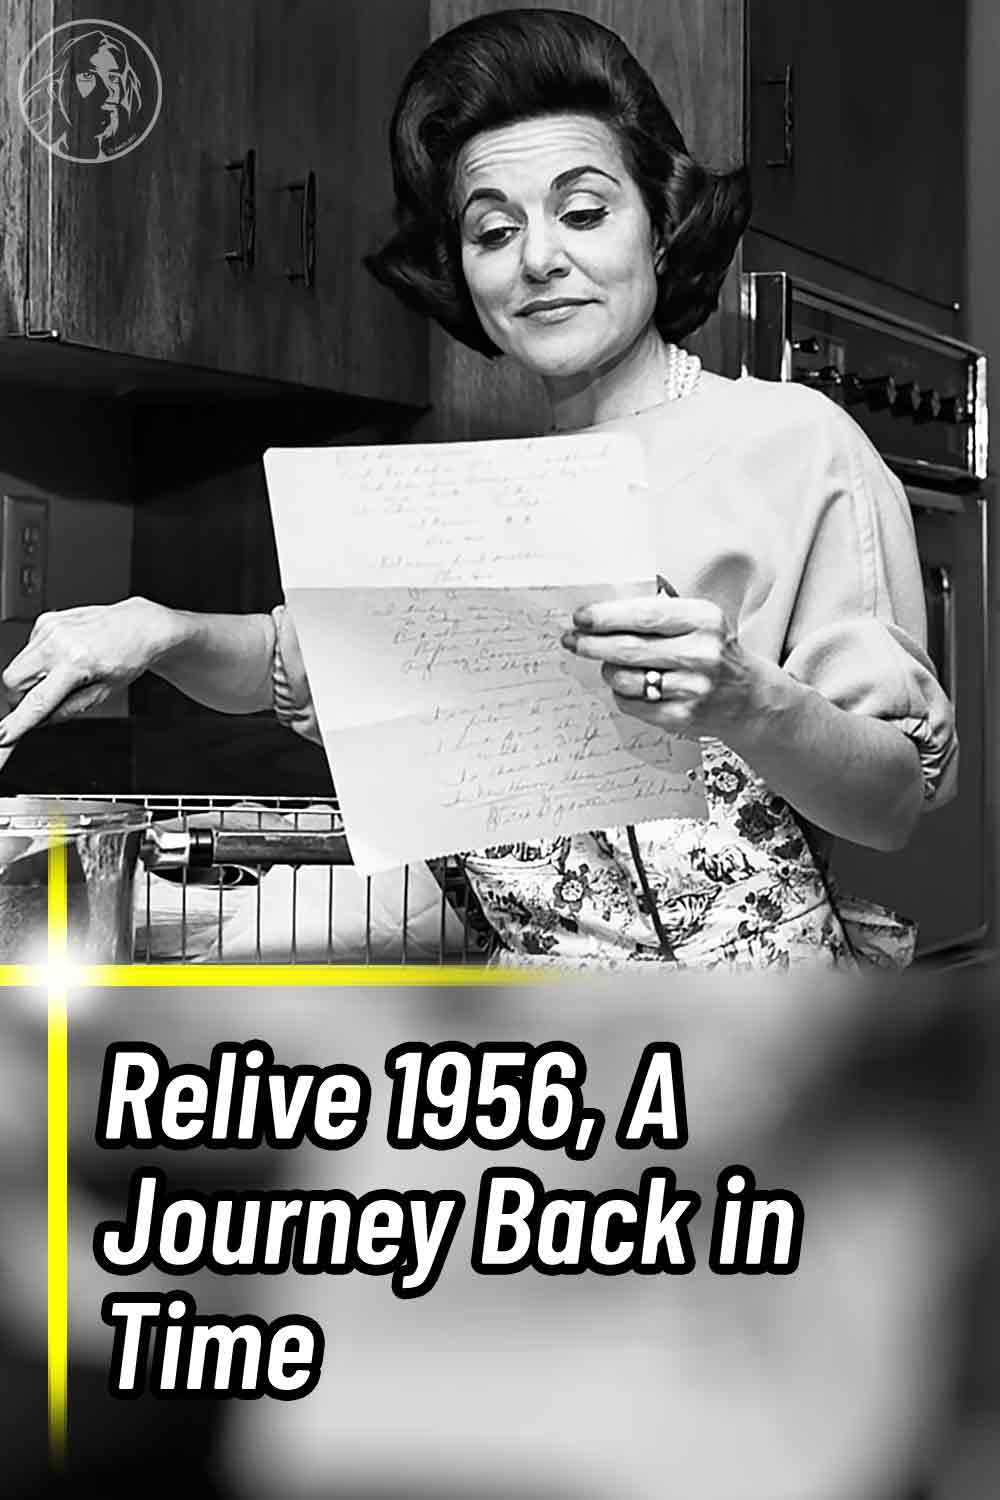 Relive 1956, A Journey Back in Time